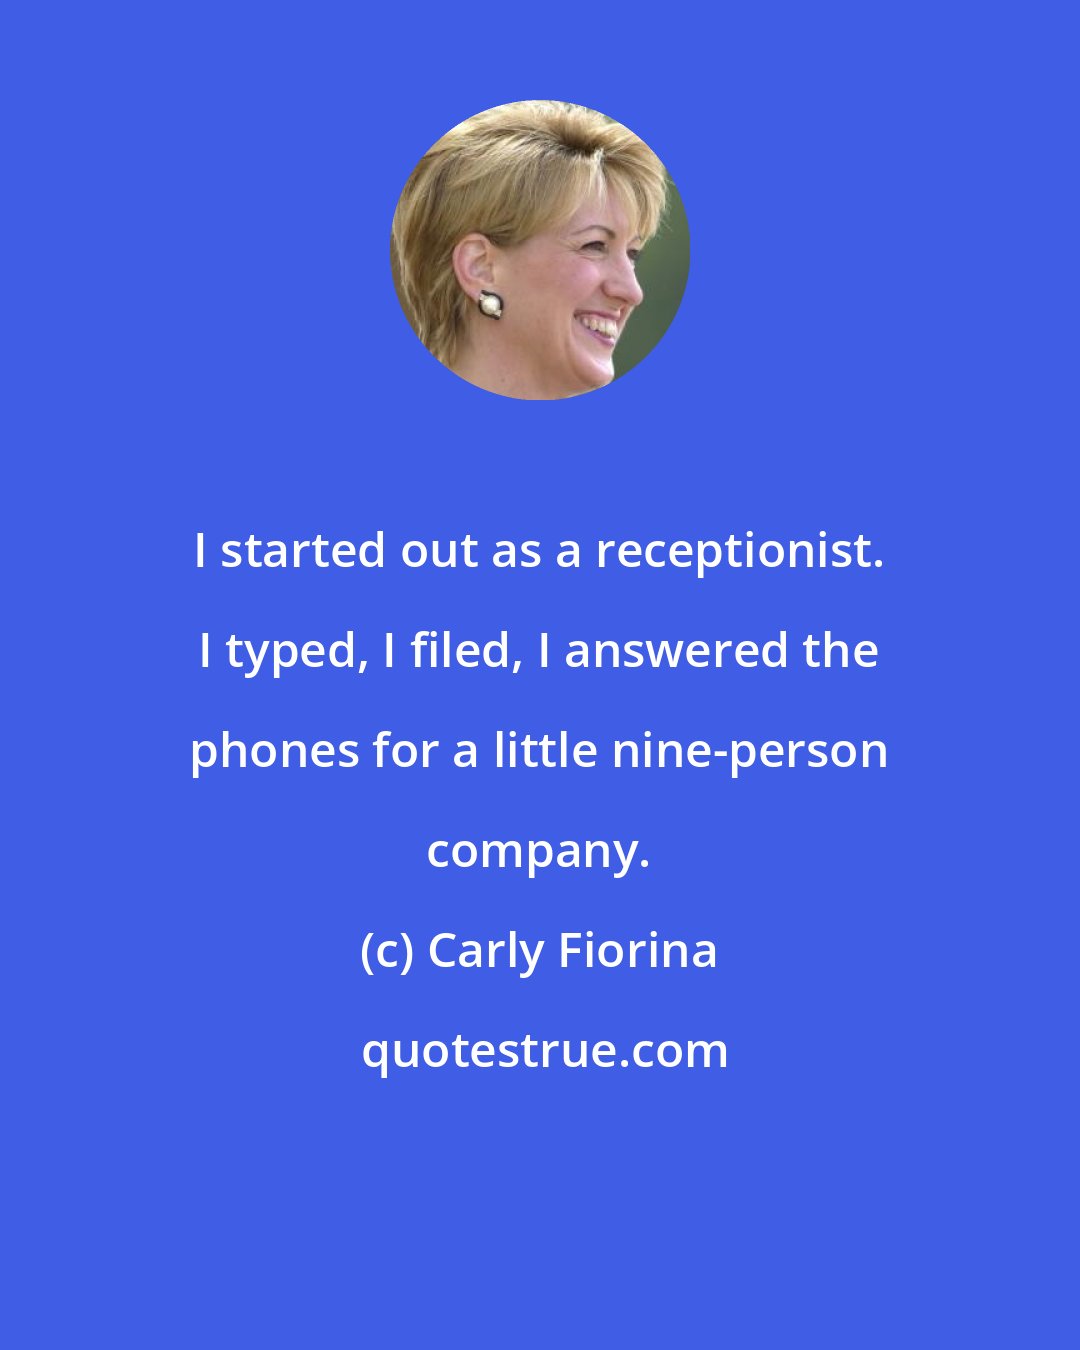 Carly Fiorina: I started out as a receptionist. I typed, I filed, I answered the phones for a little nine-person company.